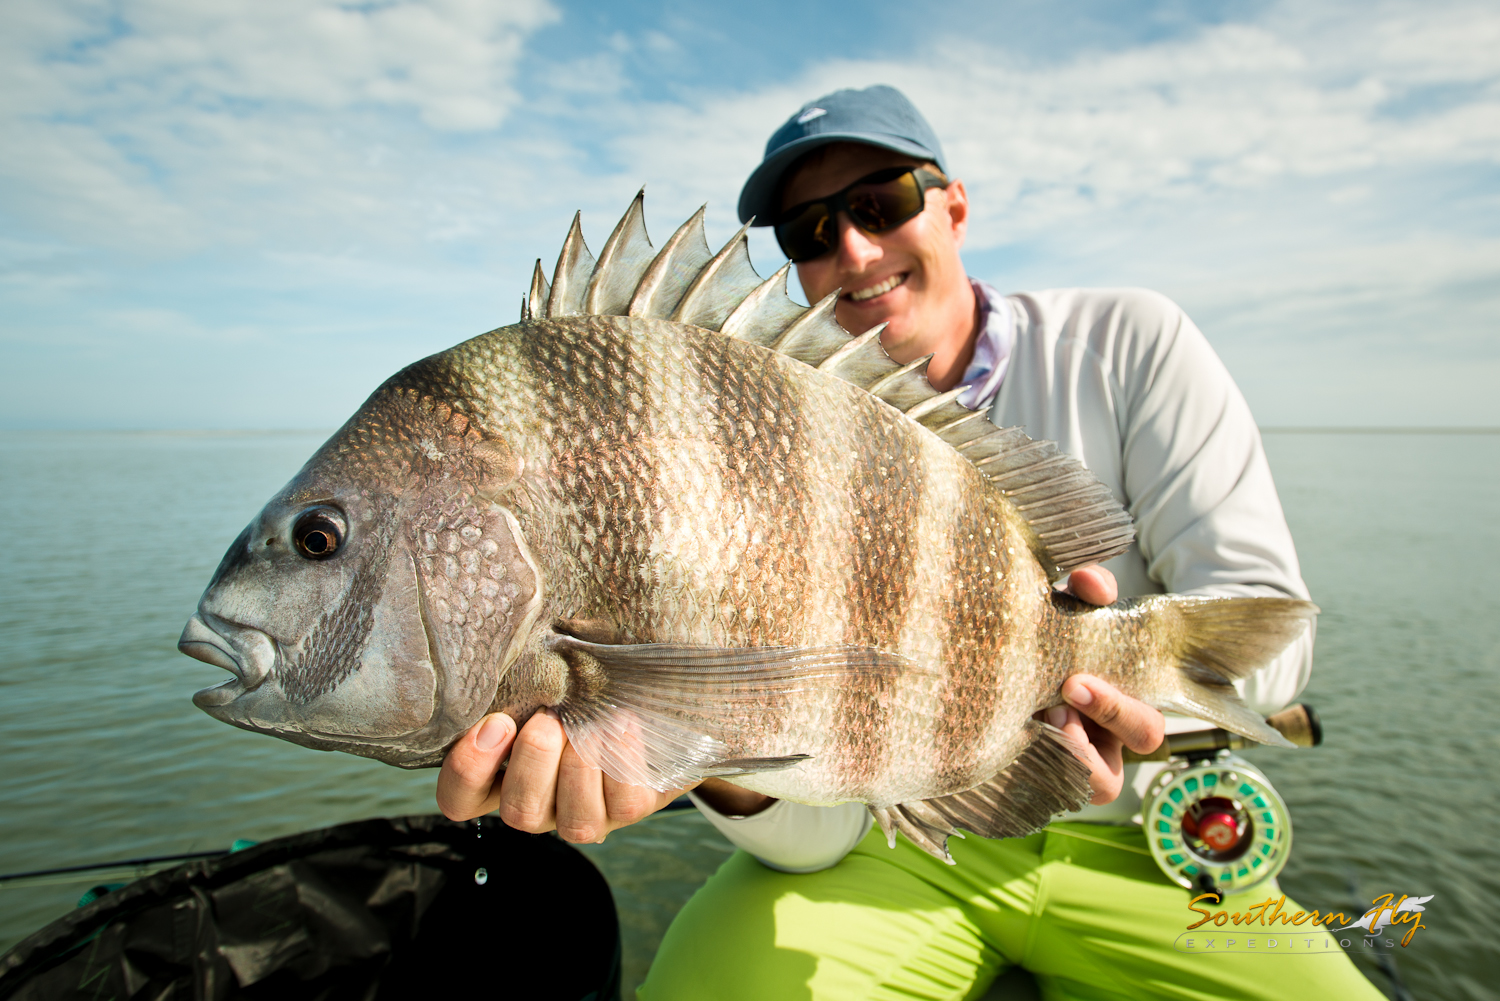 Light Tackle Fly Fishing Guide New Orleans Southern Fly Expeditions